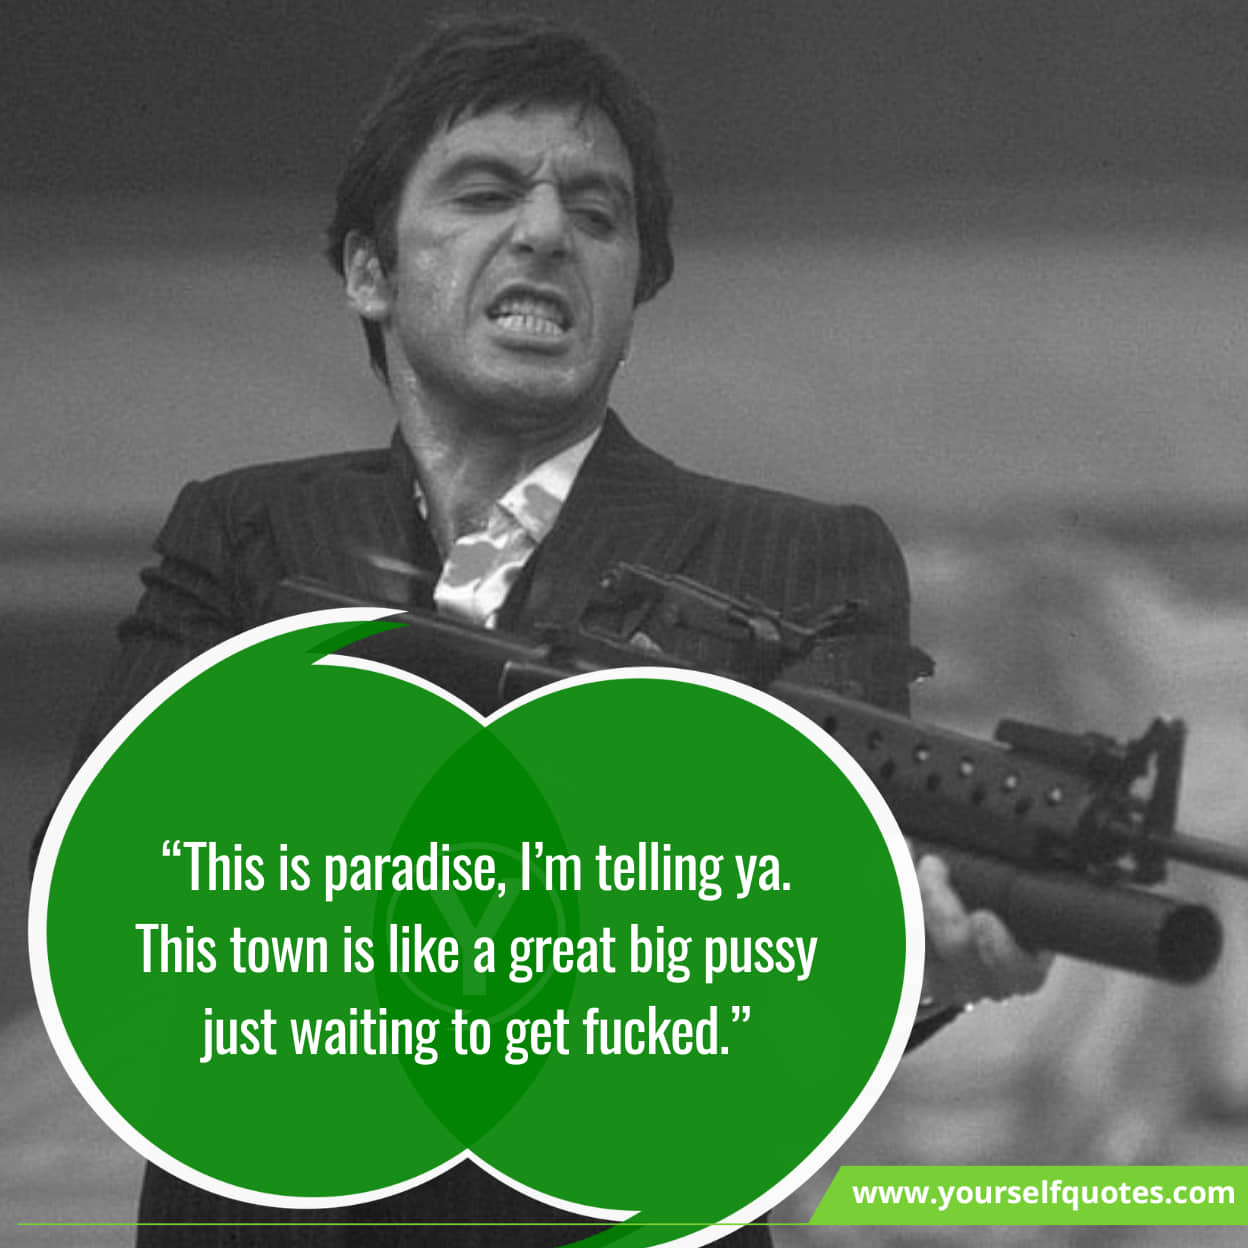 Scarface quotes on violence and revenge